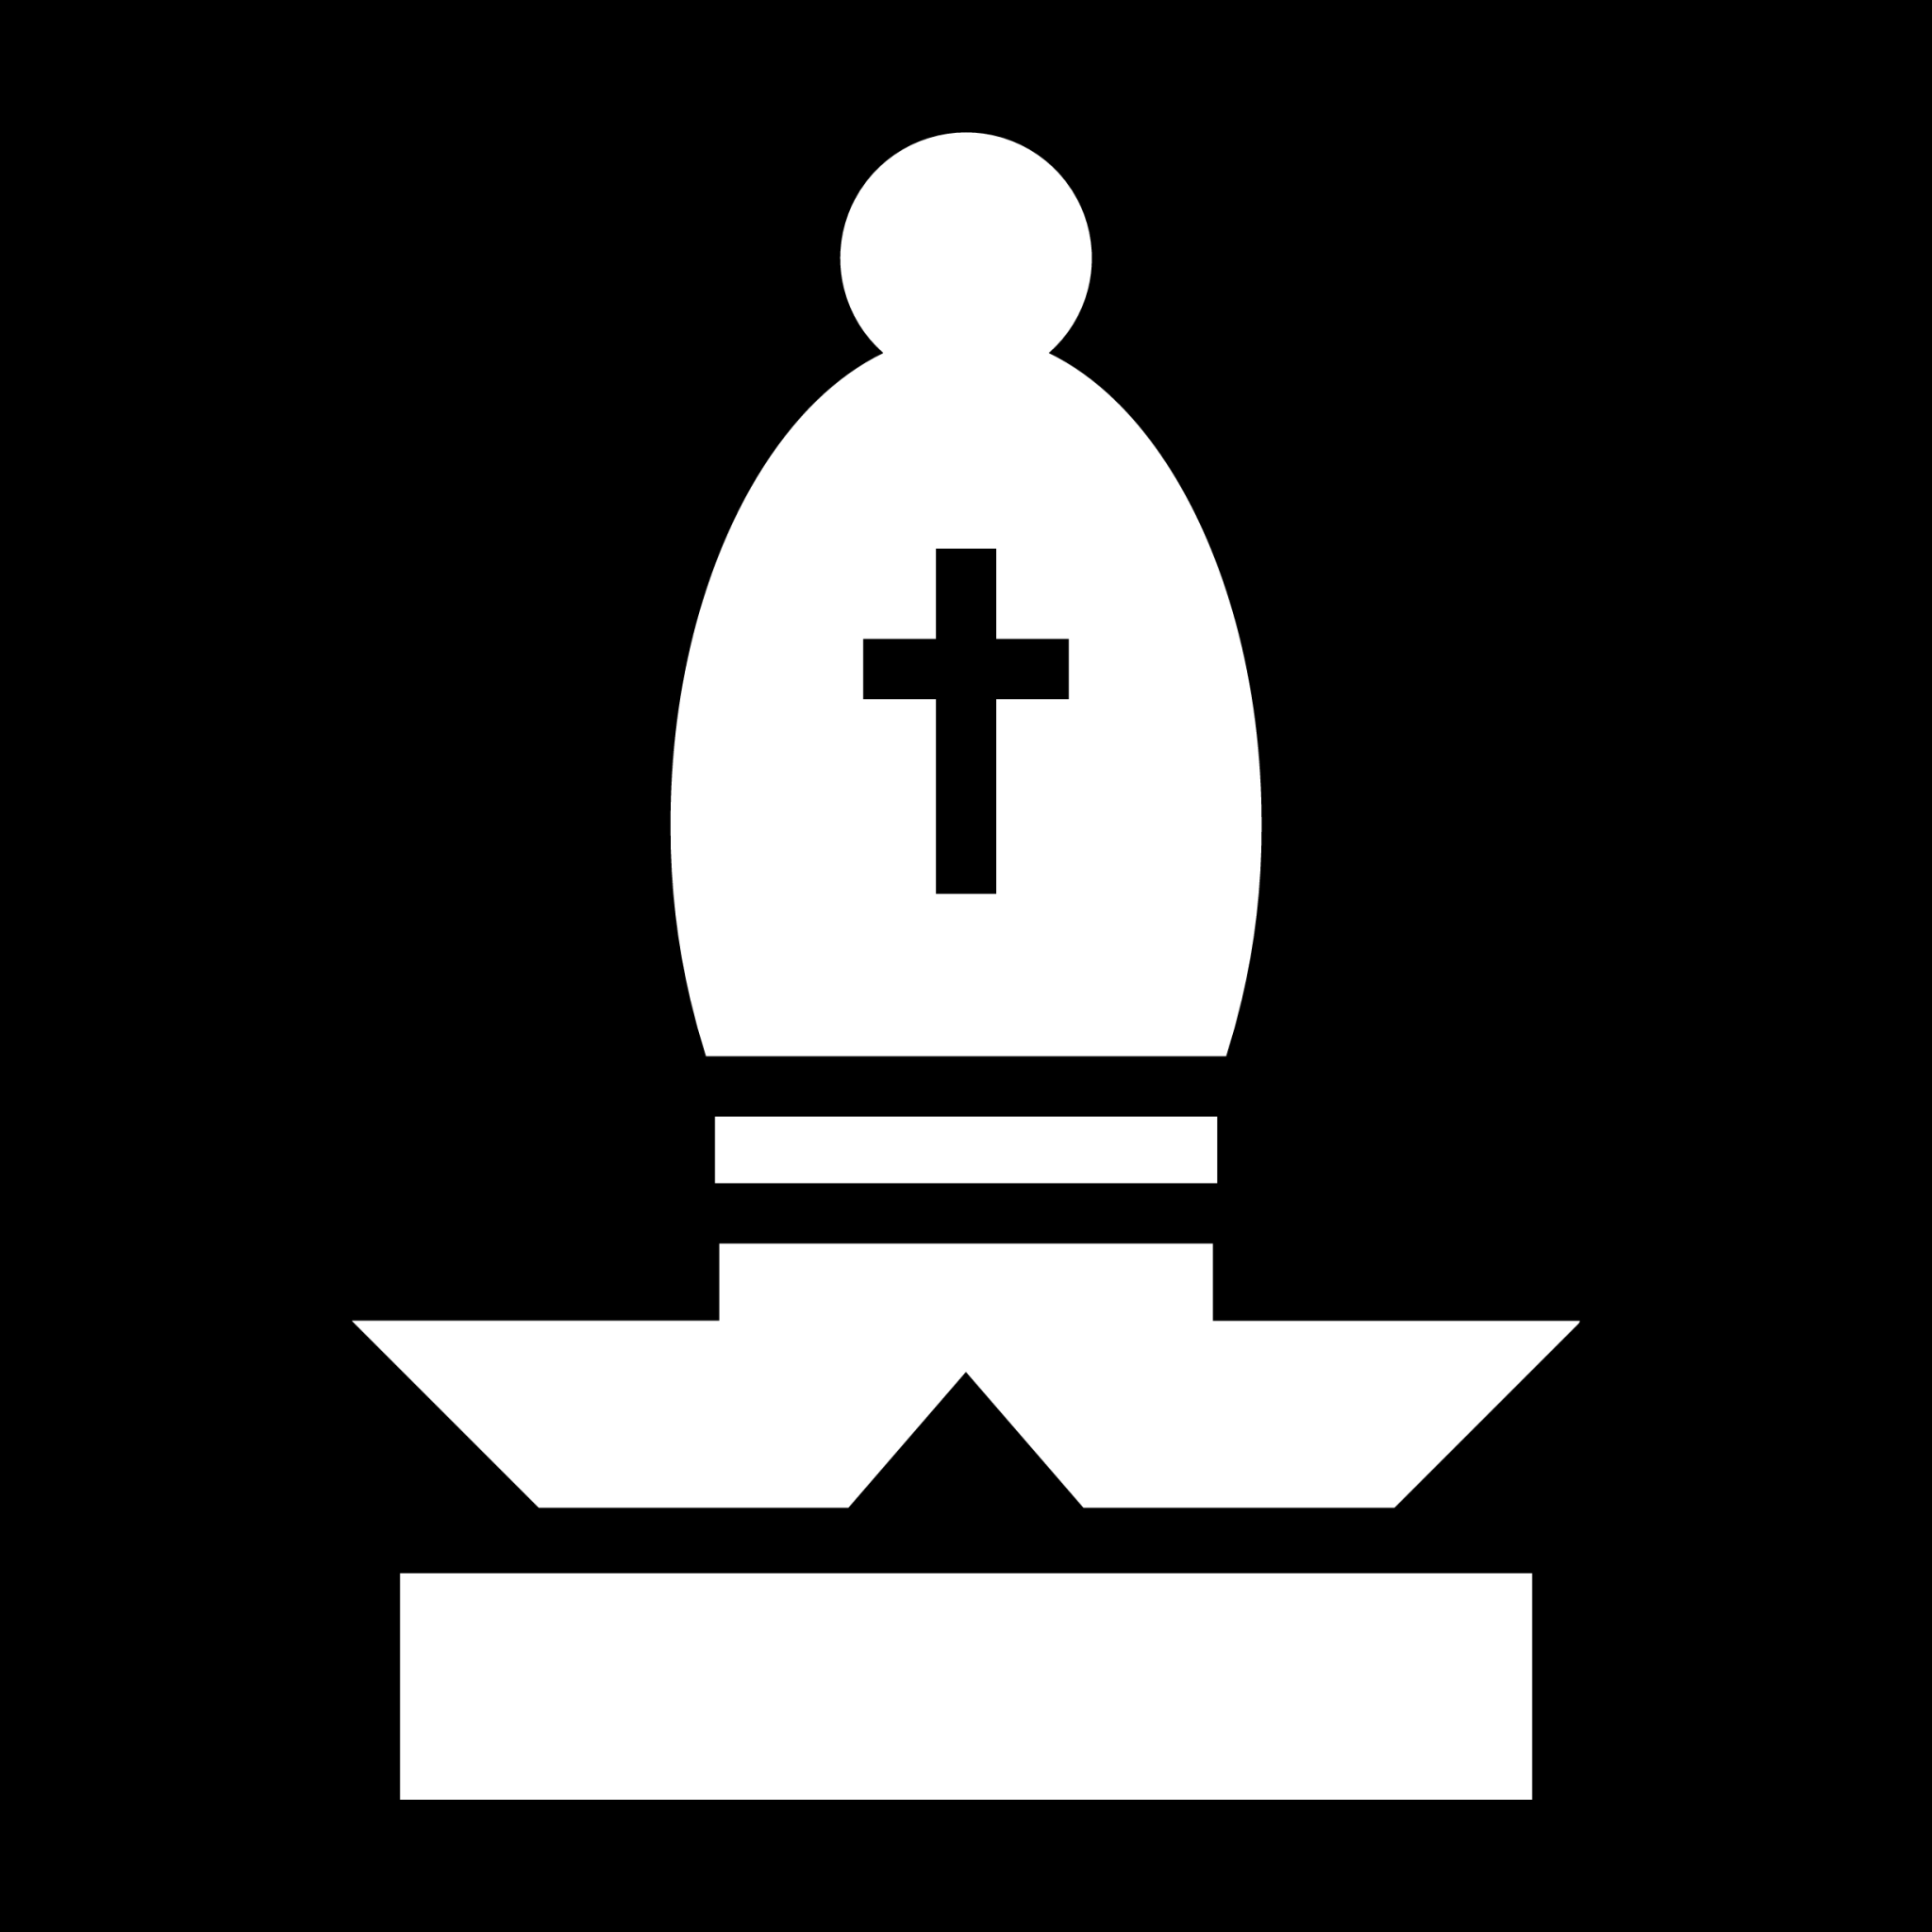 chess bishop icon